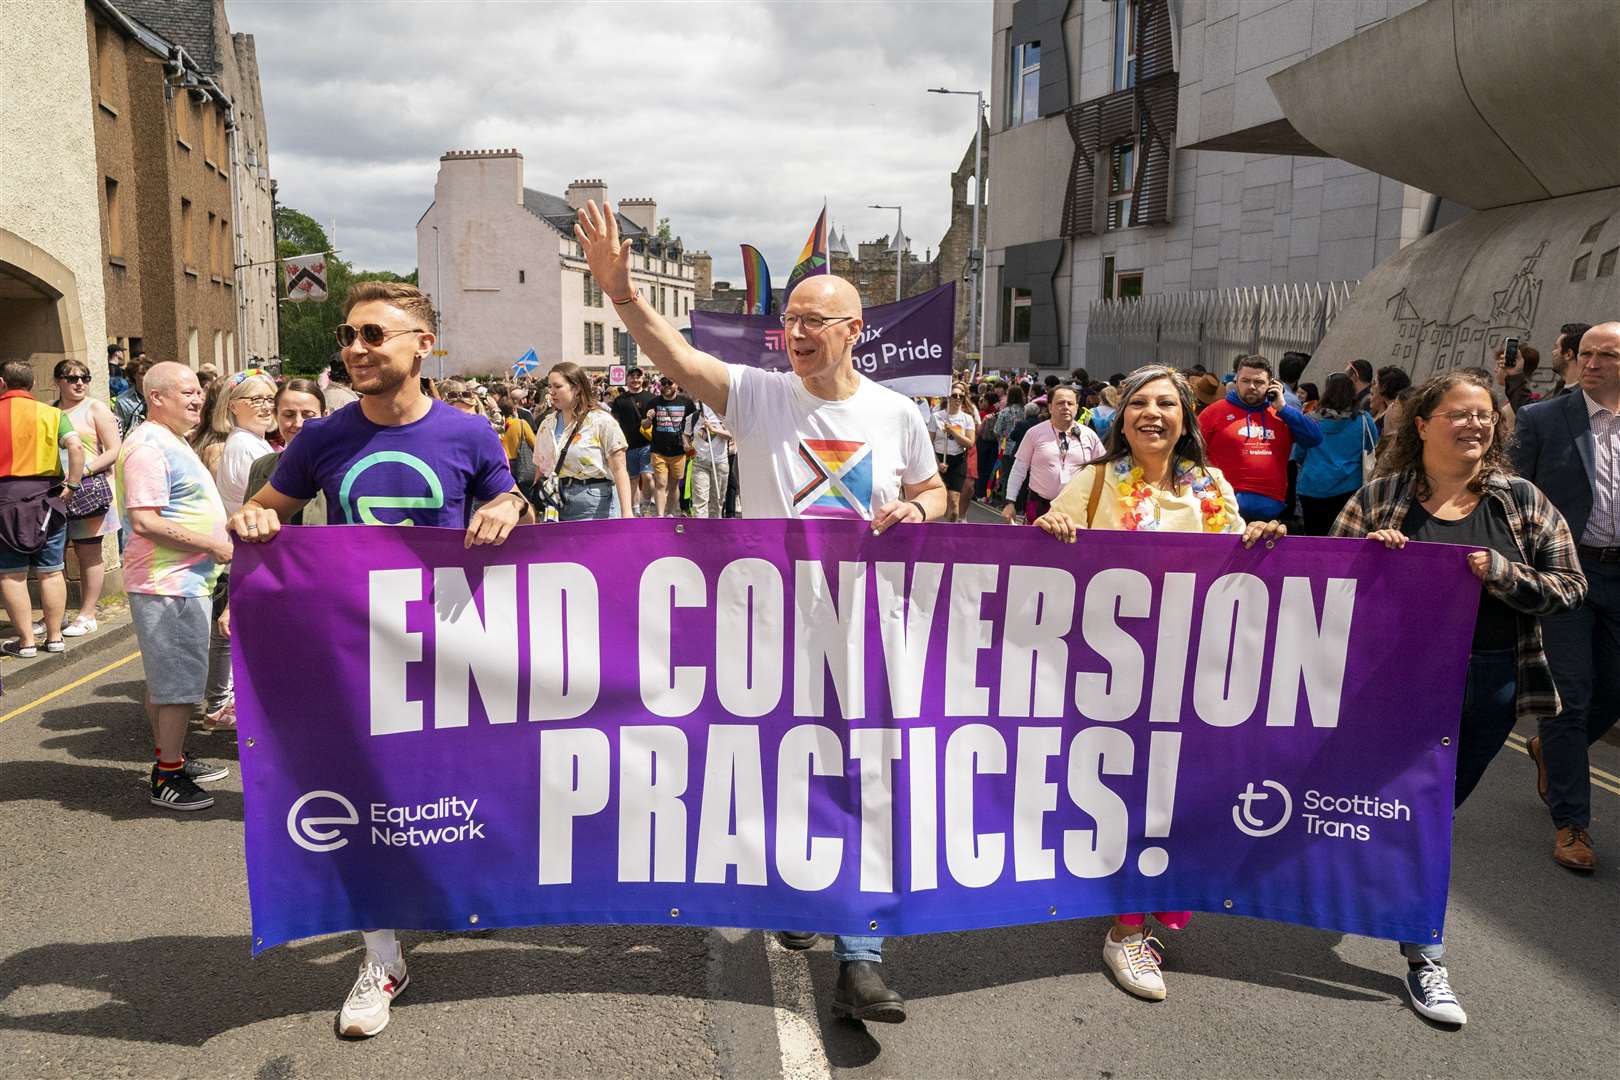 The First Minister marched in Edinburgh Pride on Saturday (Jane Barlow/PA)